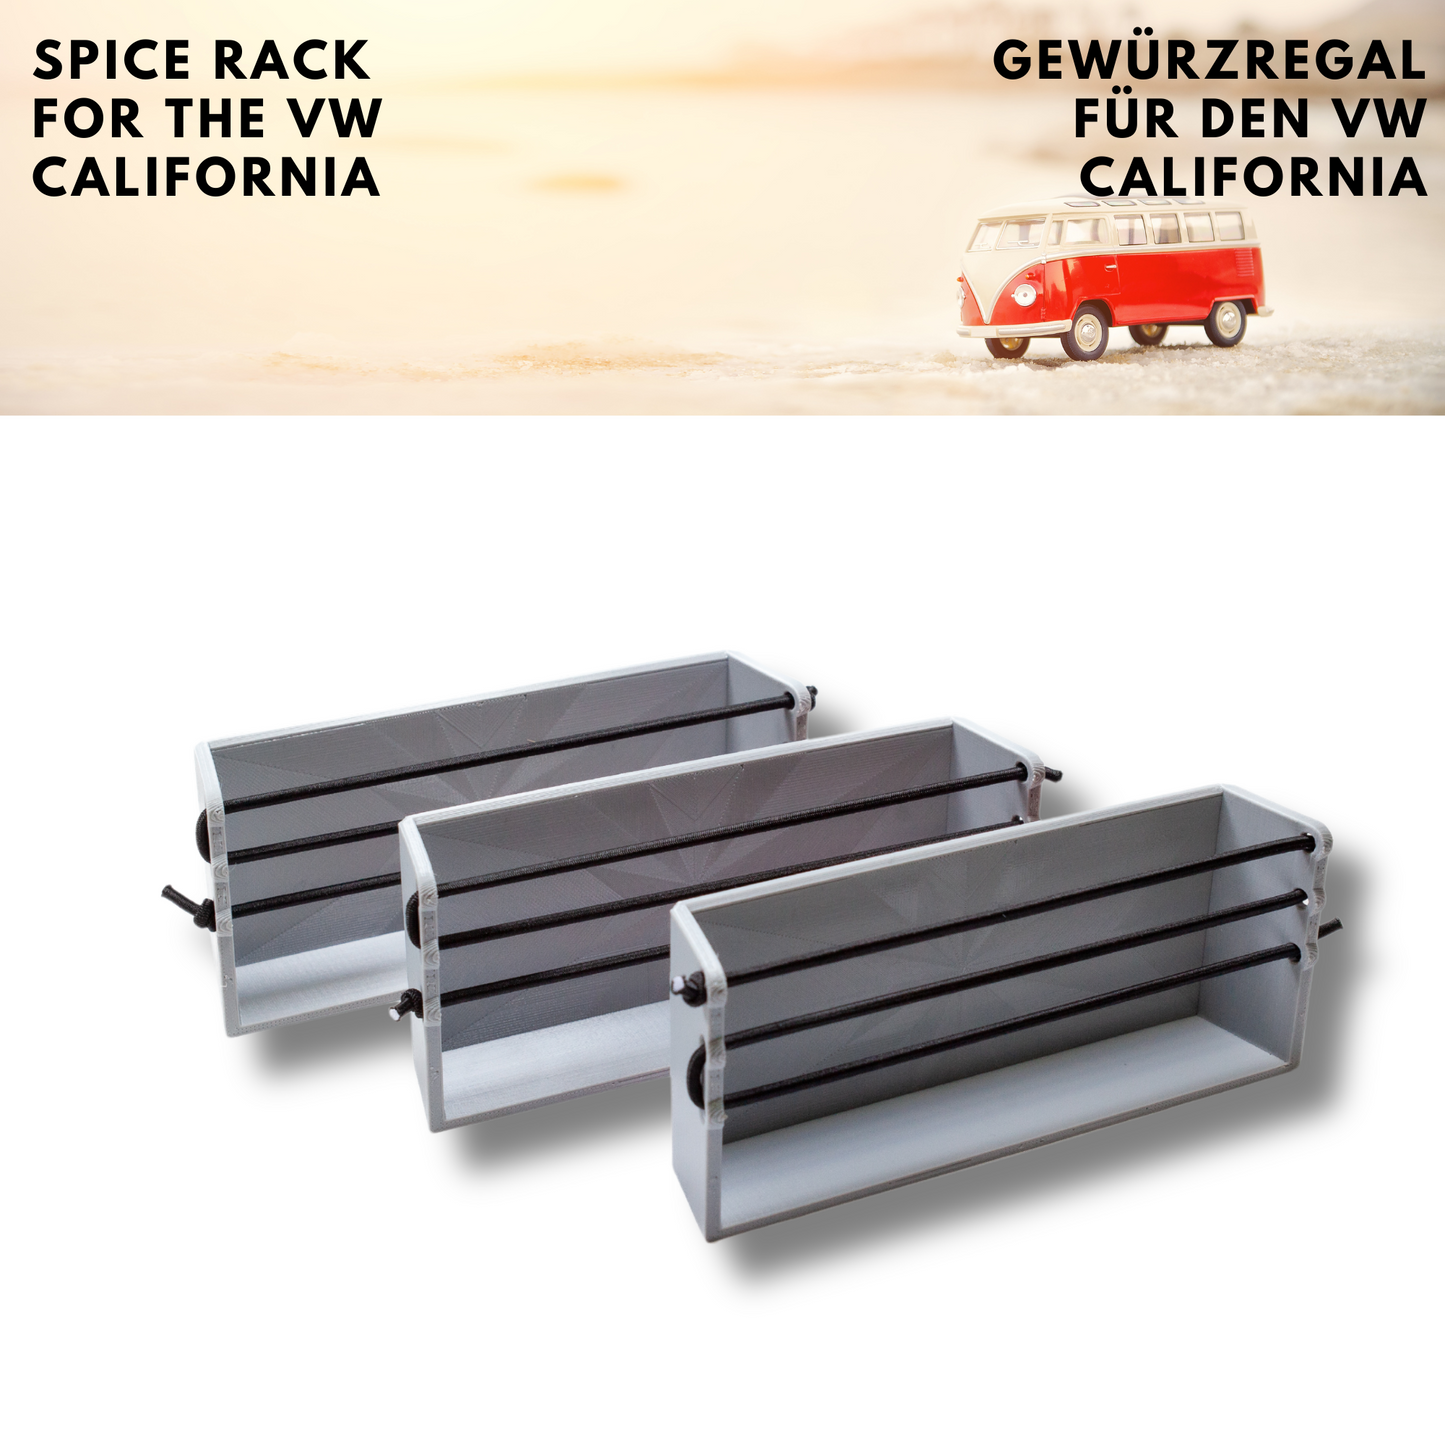 Spice rack for VW California Ocean, Coast, Comfort Line T5, T5.1, T5.2 and T6